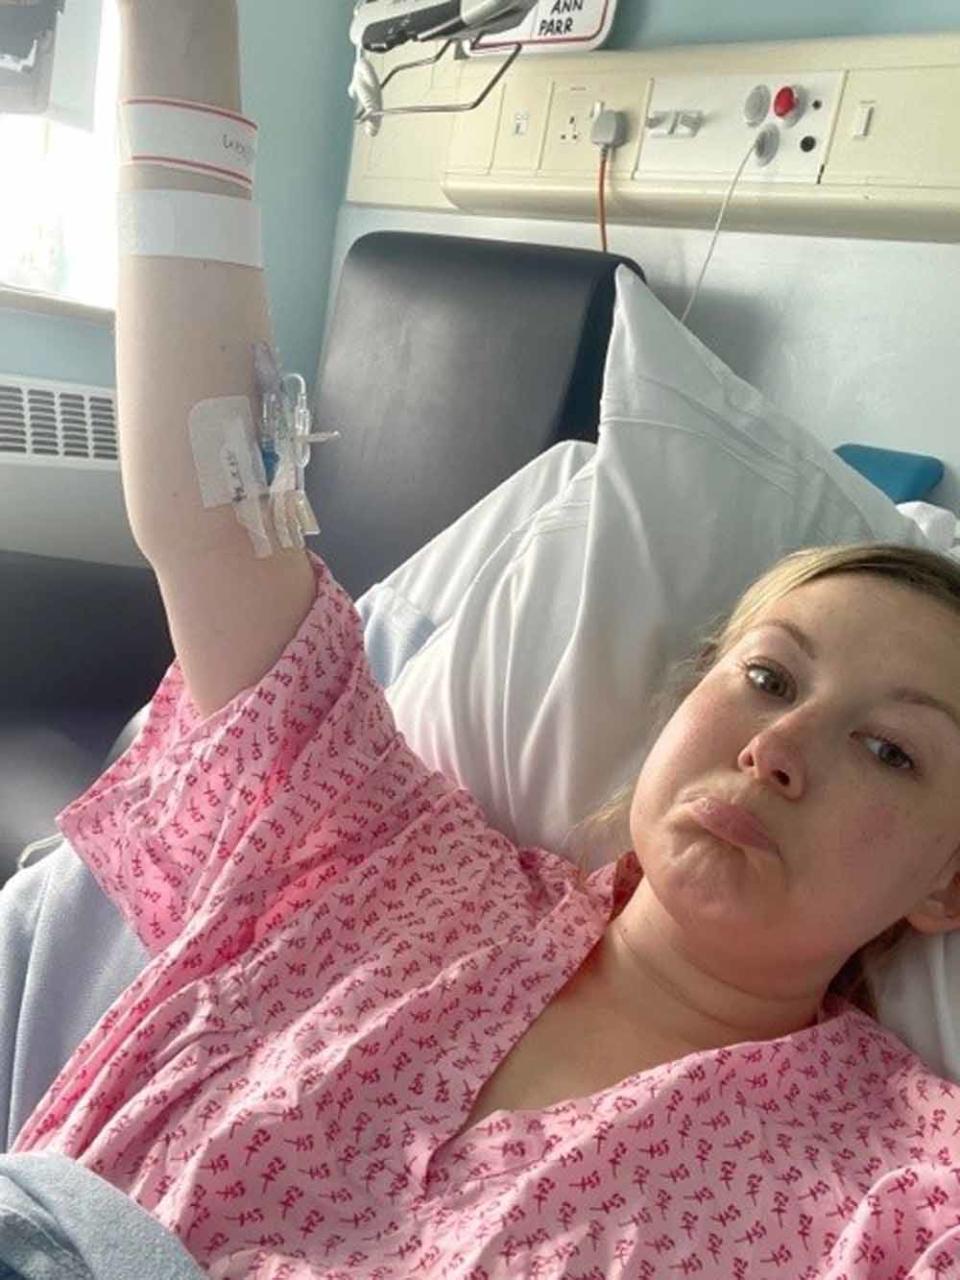 Natalie spent weeks in hospital where doctors advised her to have a stoma fitted. (Collect/PA Real Life)